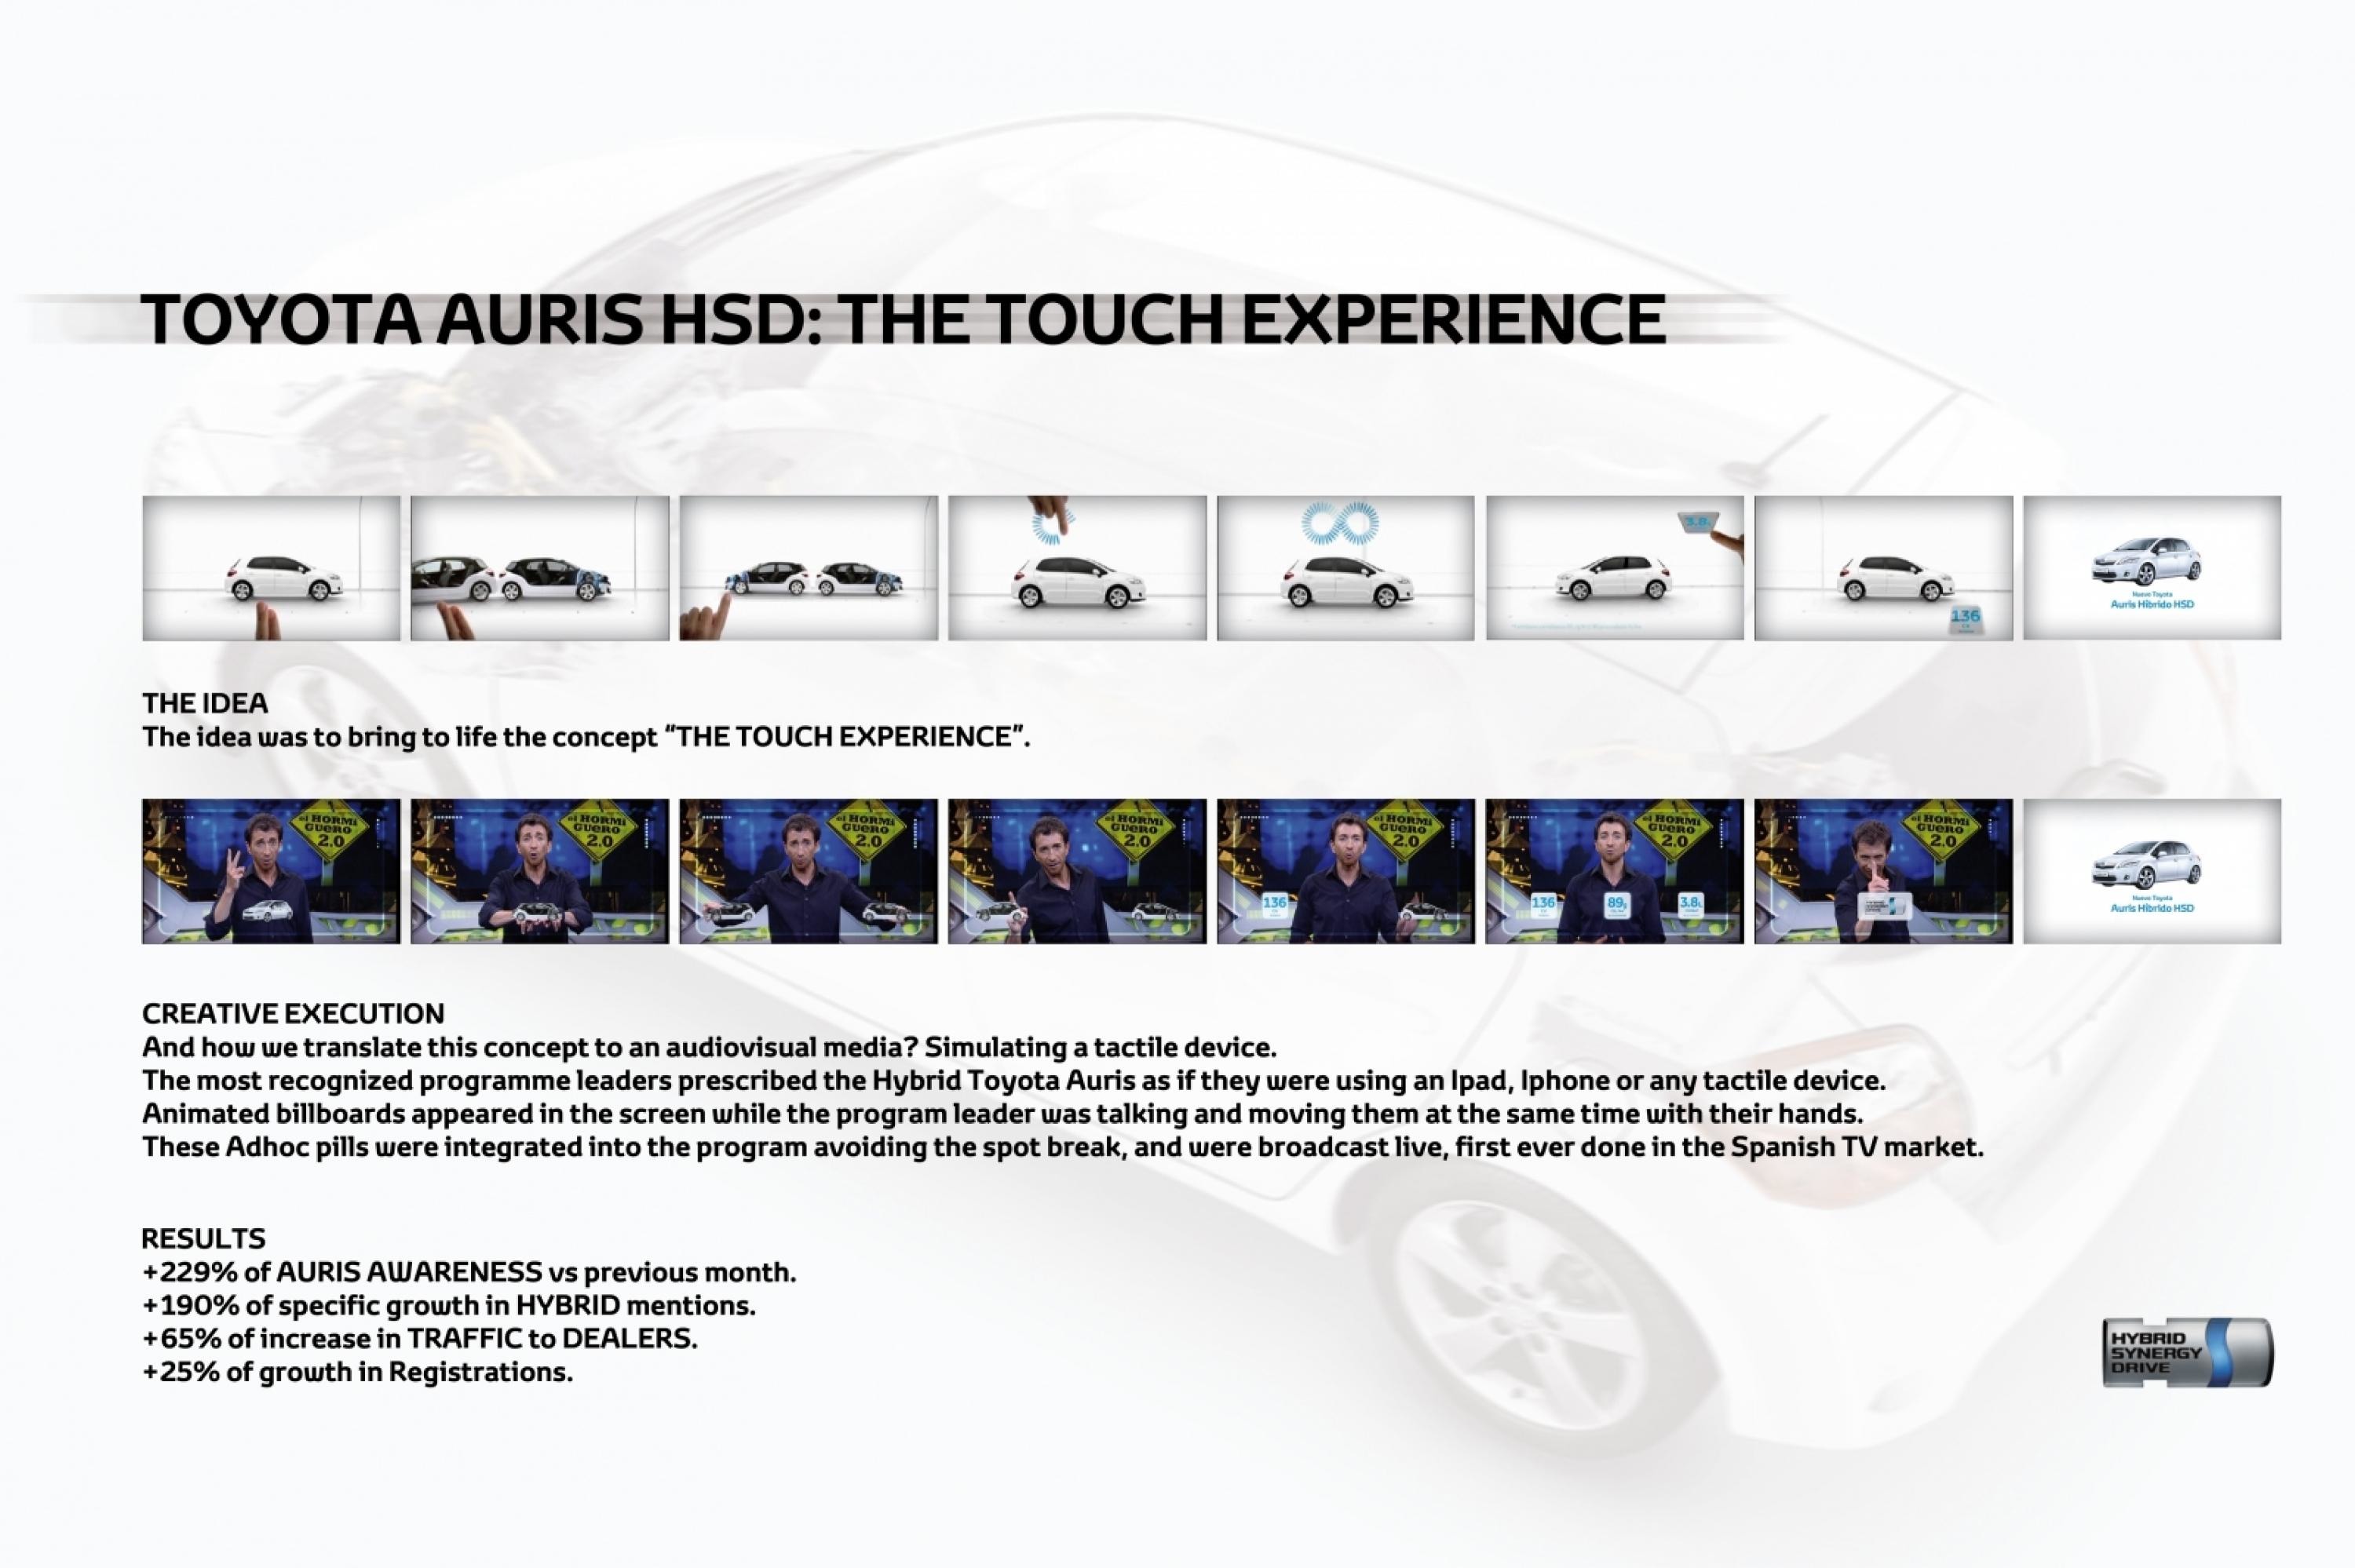 THE TOUCH EXPERIENCE